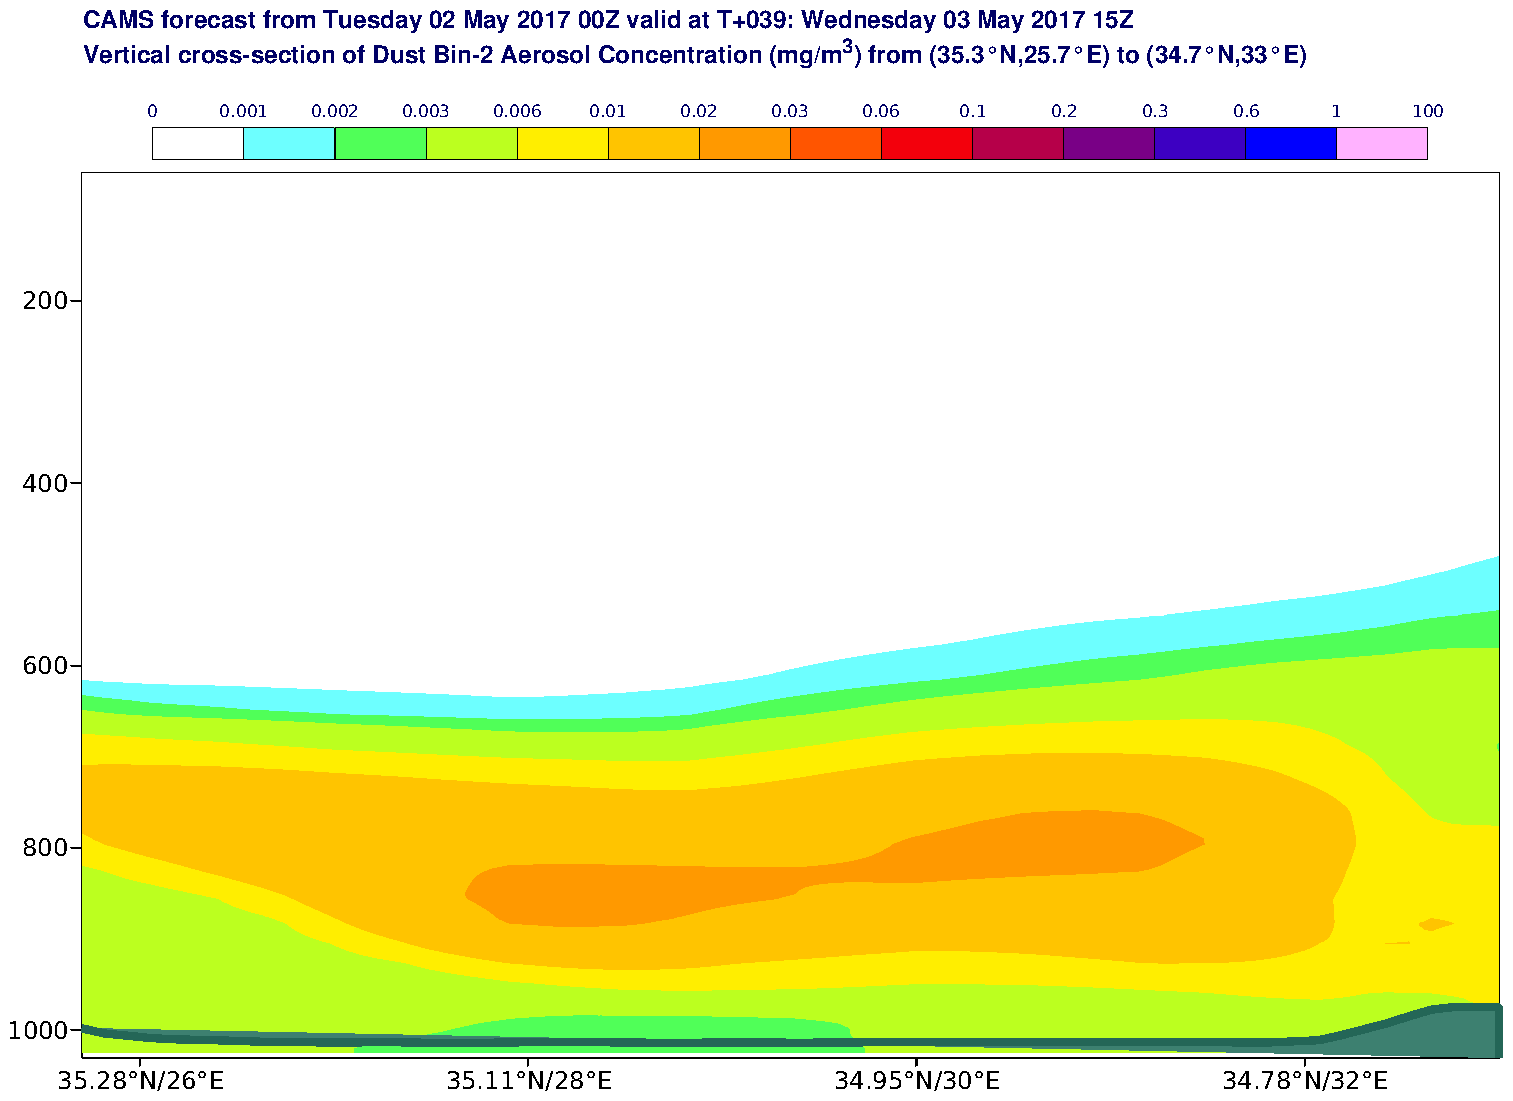 Vertical cross-section of Dust Bin-2 Aerosol Concentration (mg/m3) valid at T39 - 2017-05-03 15:00